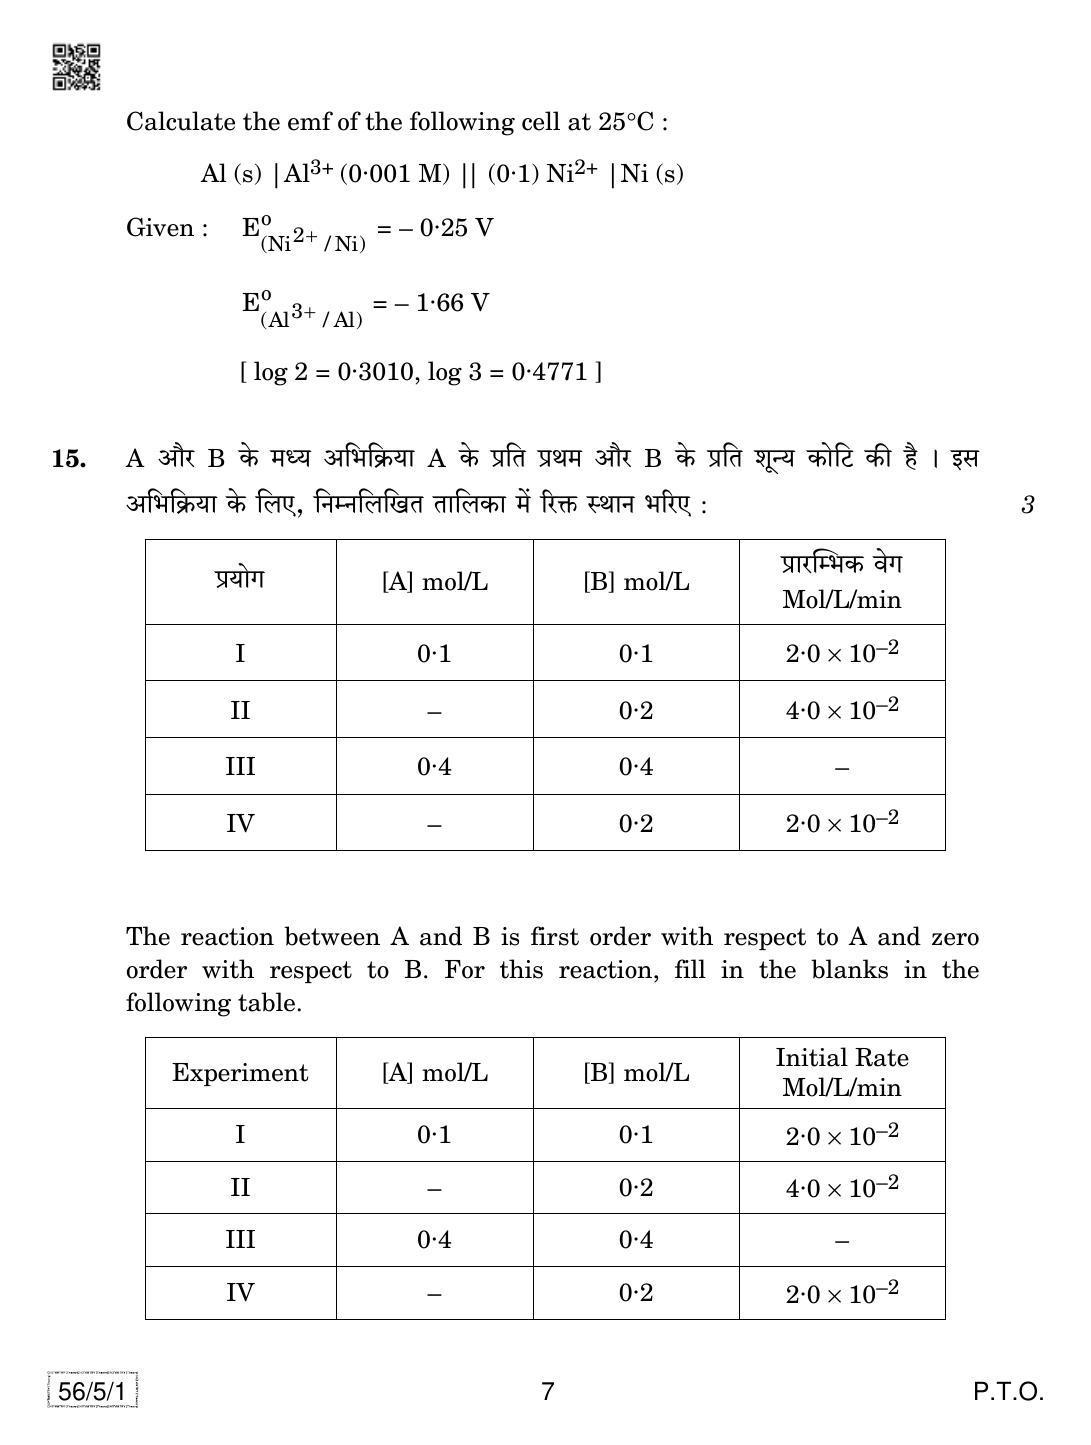 CBSE Class 12 56-5-1 Chemistry 2019 Question Paper - Page 7